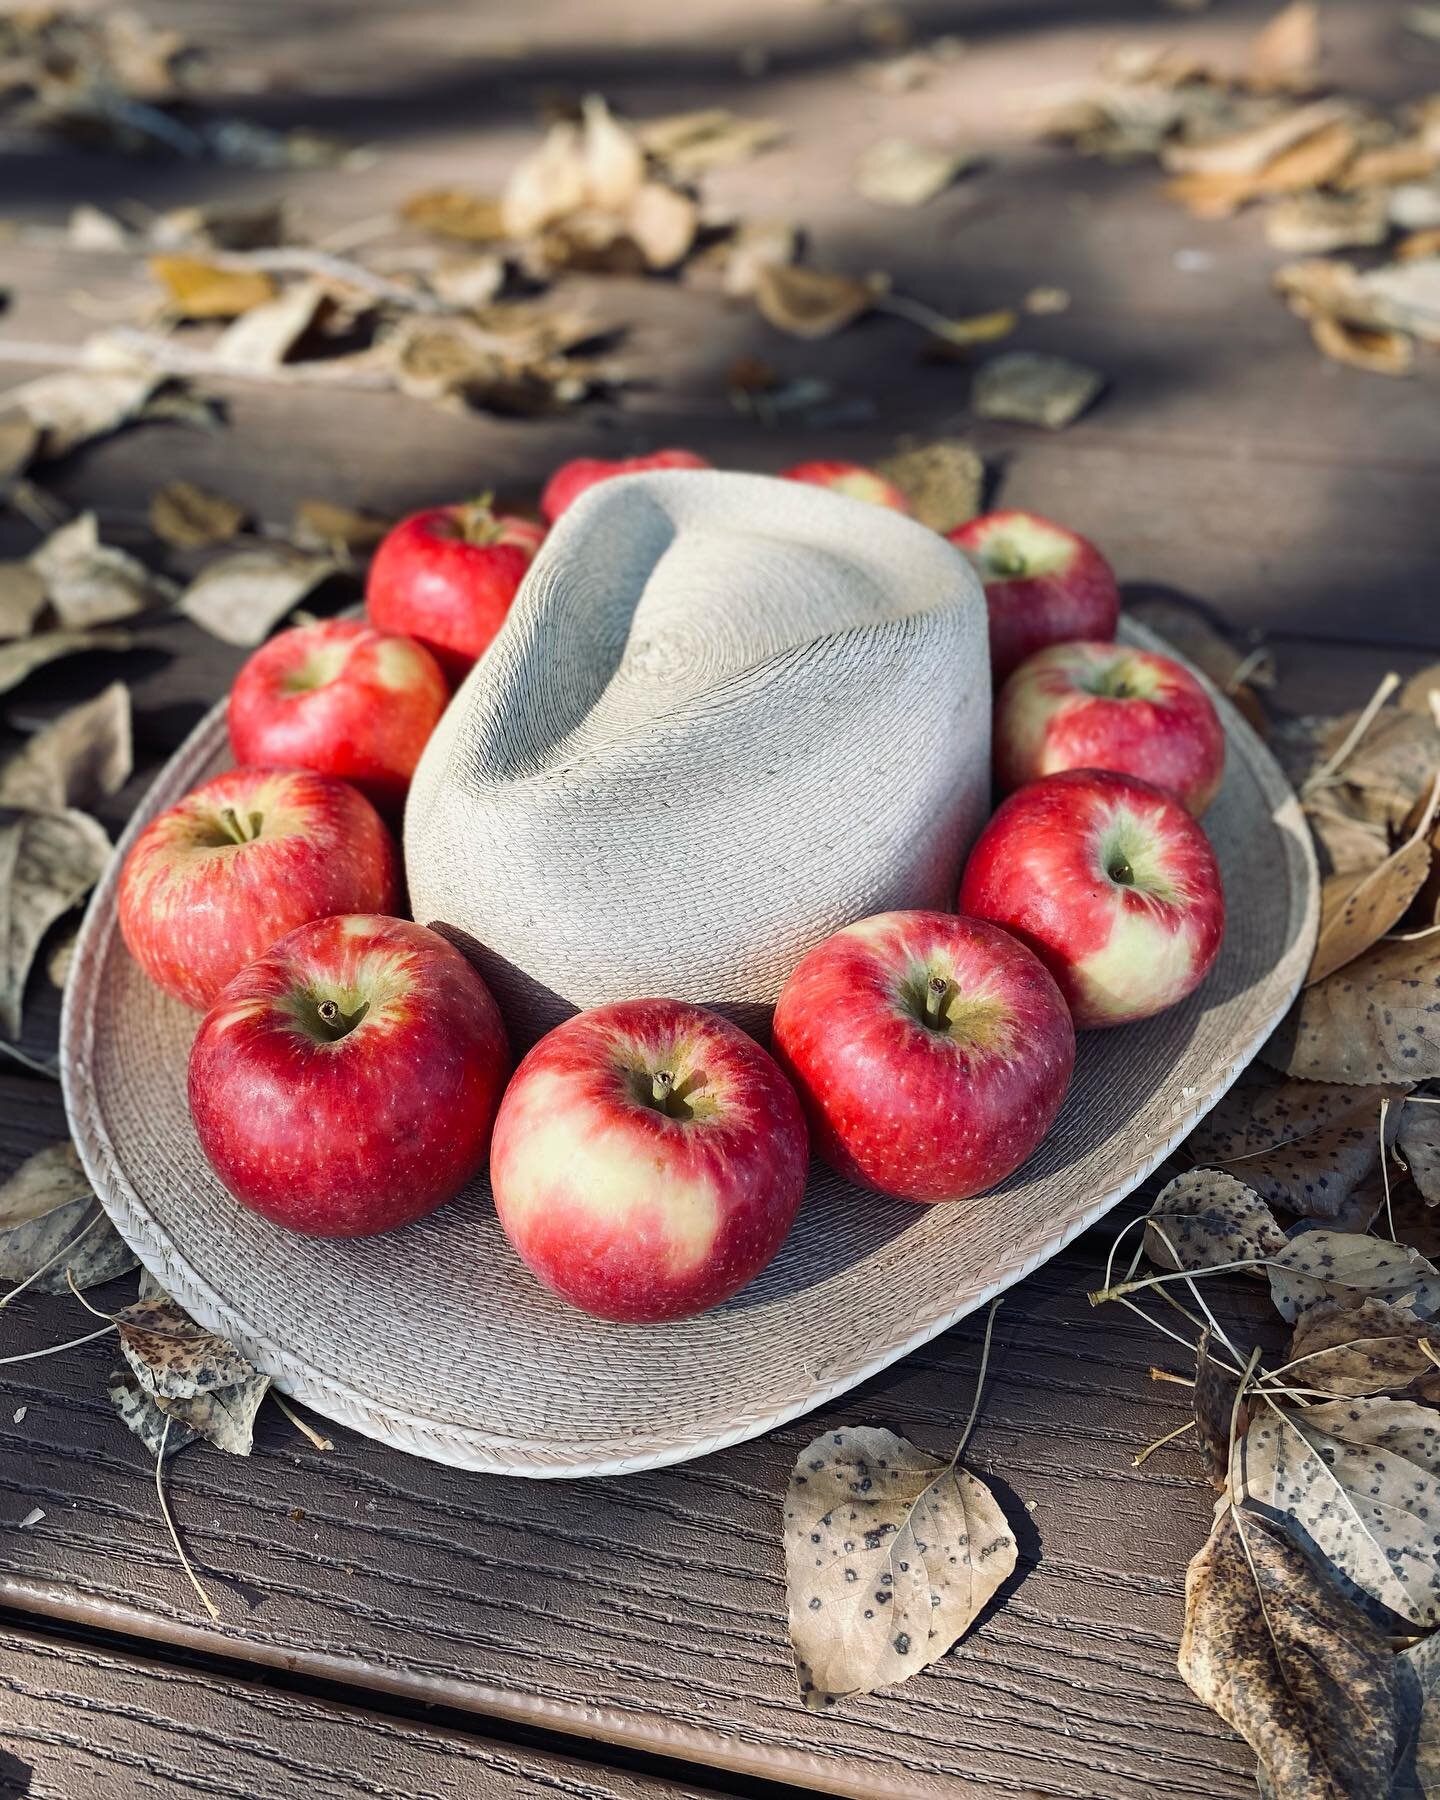 🍎Crisp. Pie. Brown Betty. Sauce. Butter. 

🍎With Cheese. Peanut butter. Honey. Caramel.

🍎Sliced. Whole. Chunky. Diced. 

What&rsquo;s your favorite way to enjoy apples? 

It&rsquo;s time we remember that these beauties are ✨seasonal✨ and the true